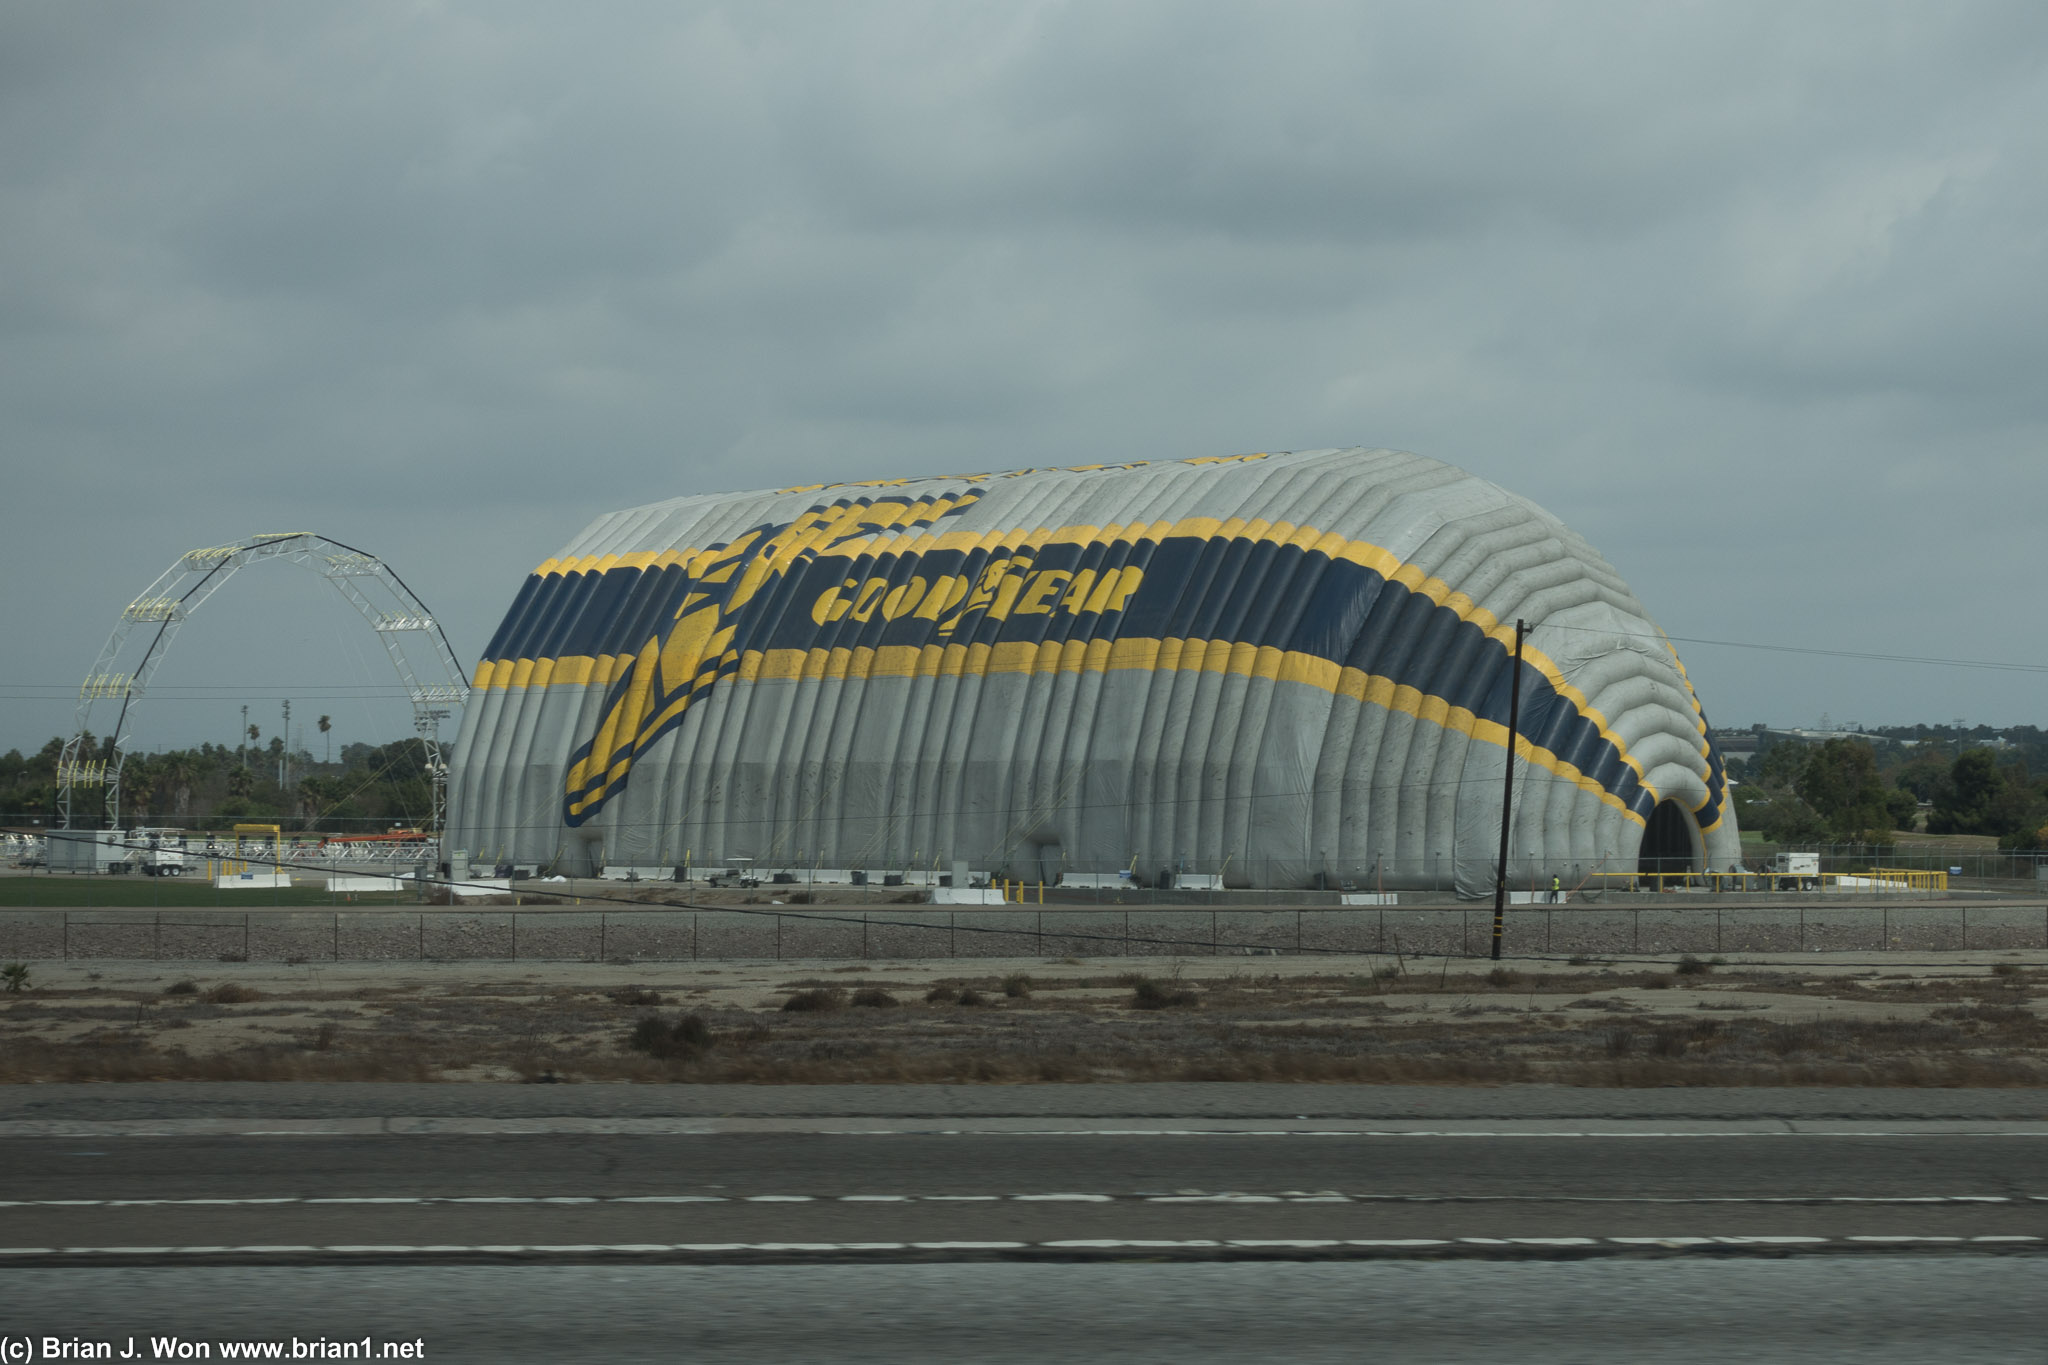 Is Goodyear erecting a hanger for the blimp?